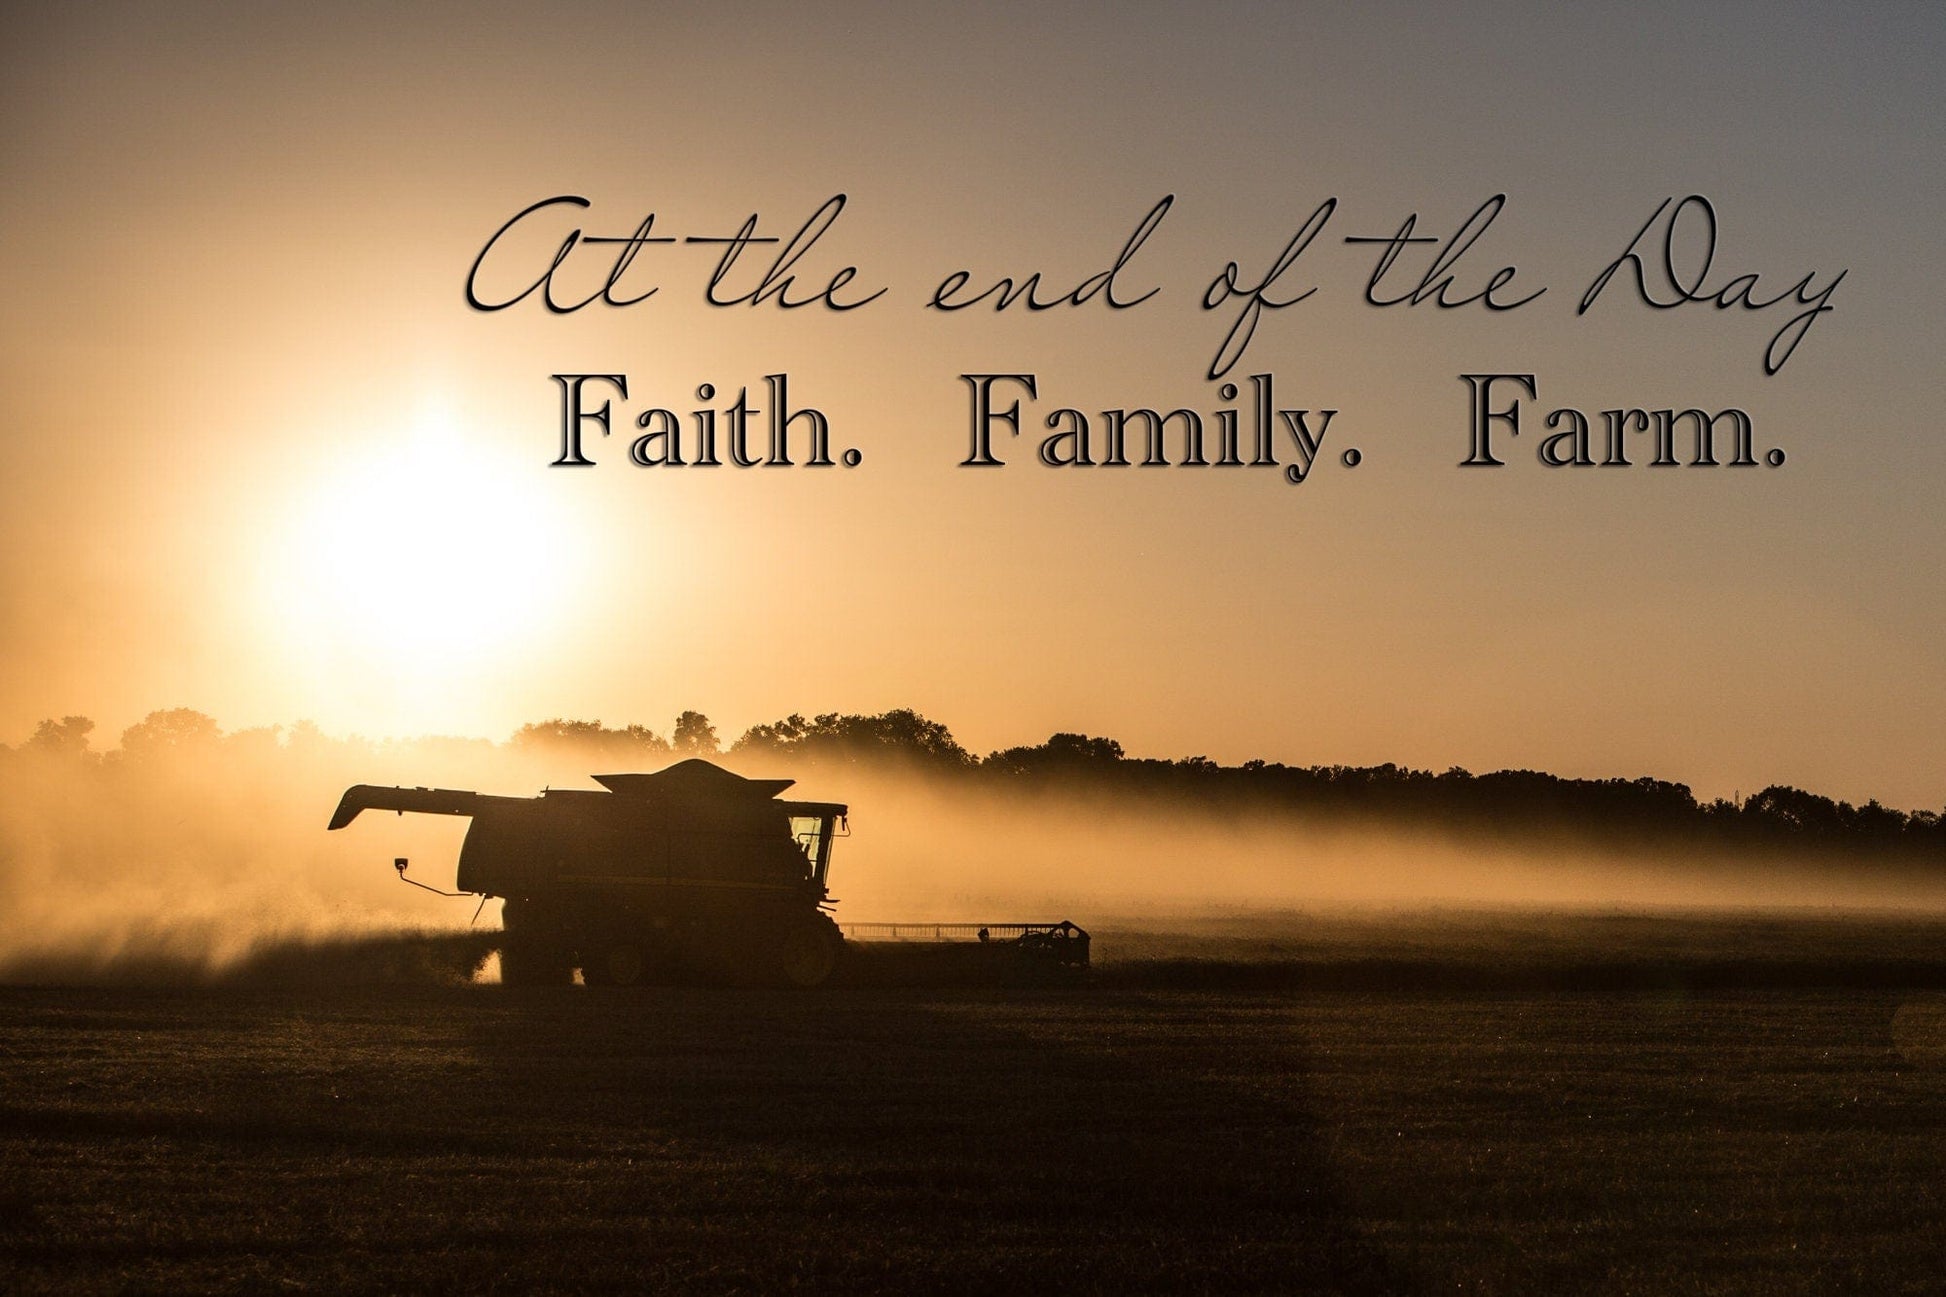 Faith Family Farm Wall Art - Quotes About Life Canvas Print Paper Photo Print / 12 x 18 Inches Wall Art Teri James Photography